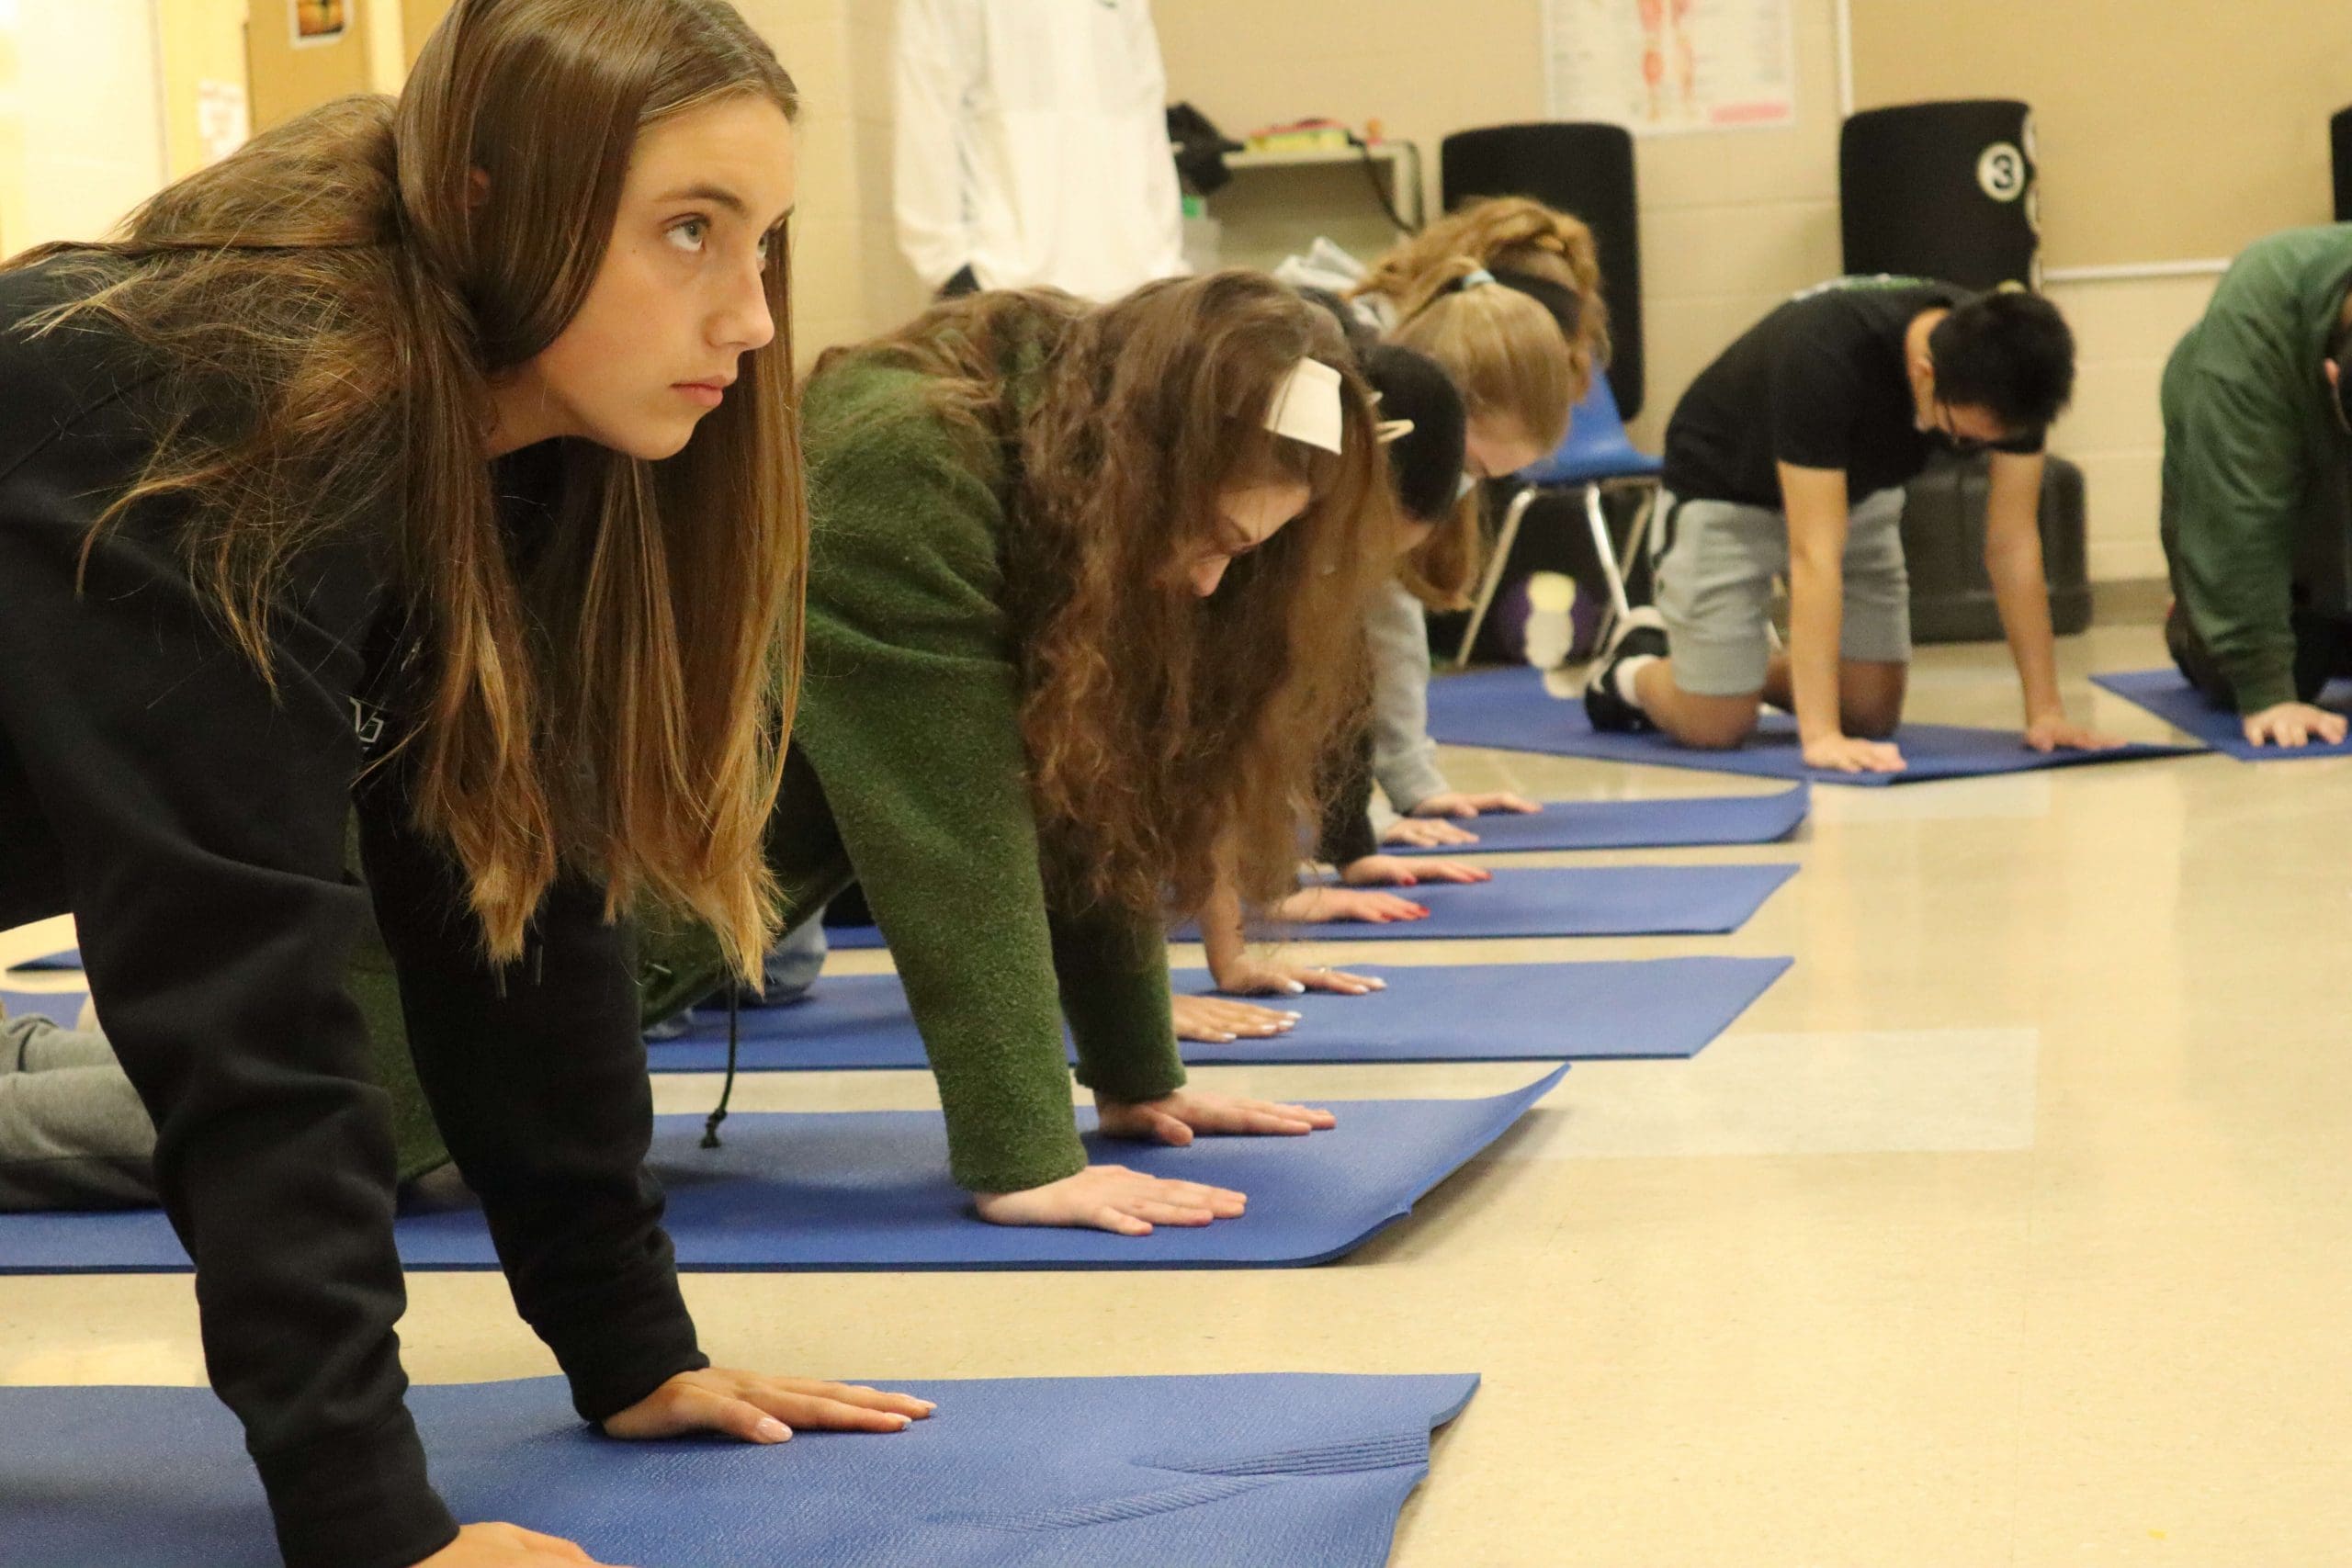 Students follow along to a PLT4M yoga lesson during physical education class.